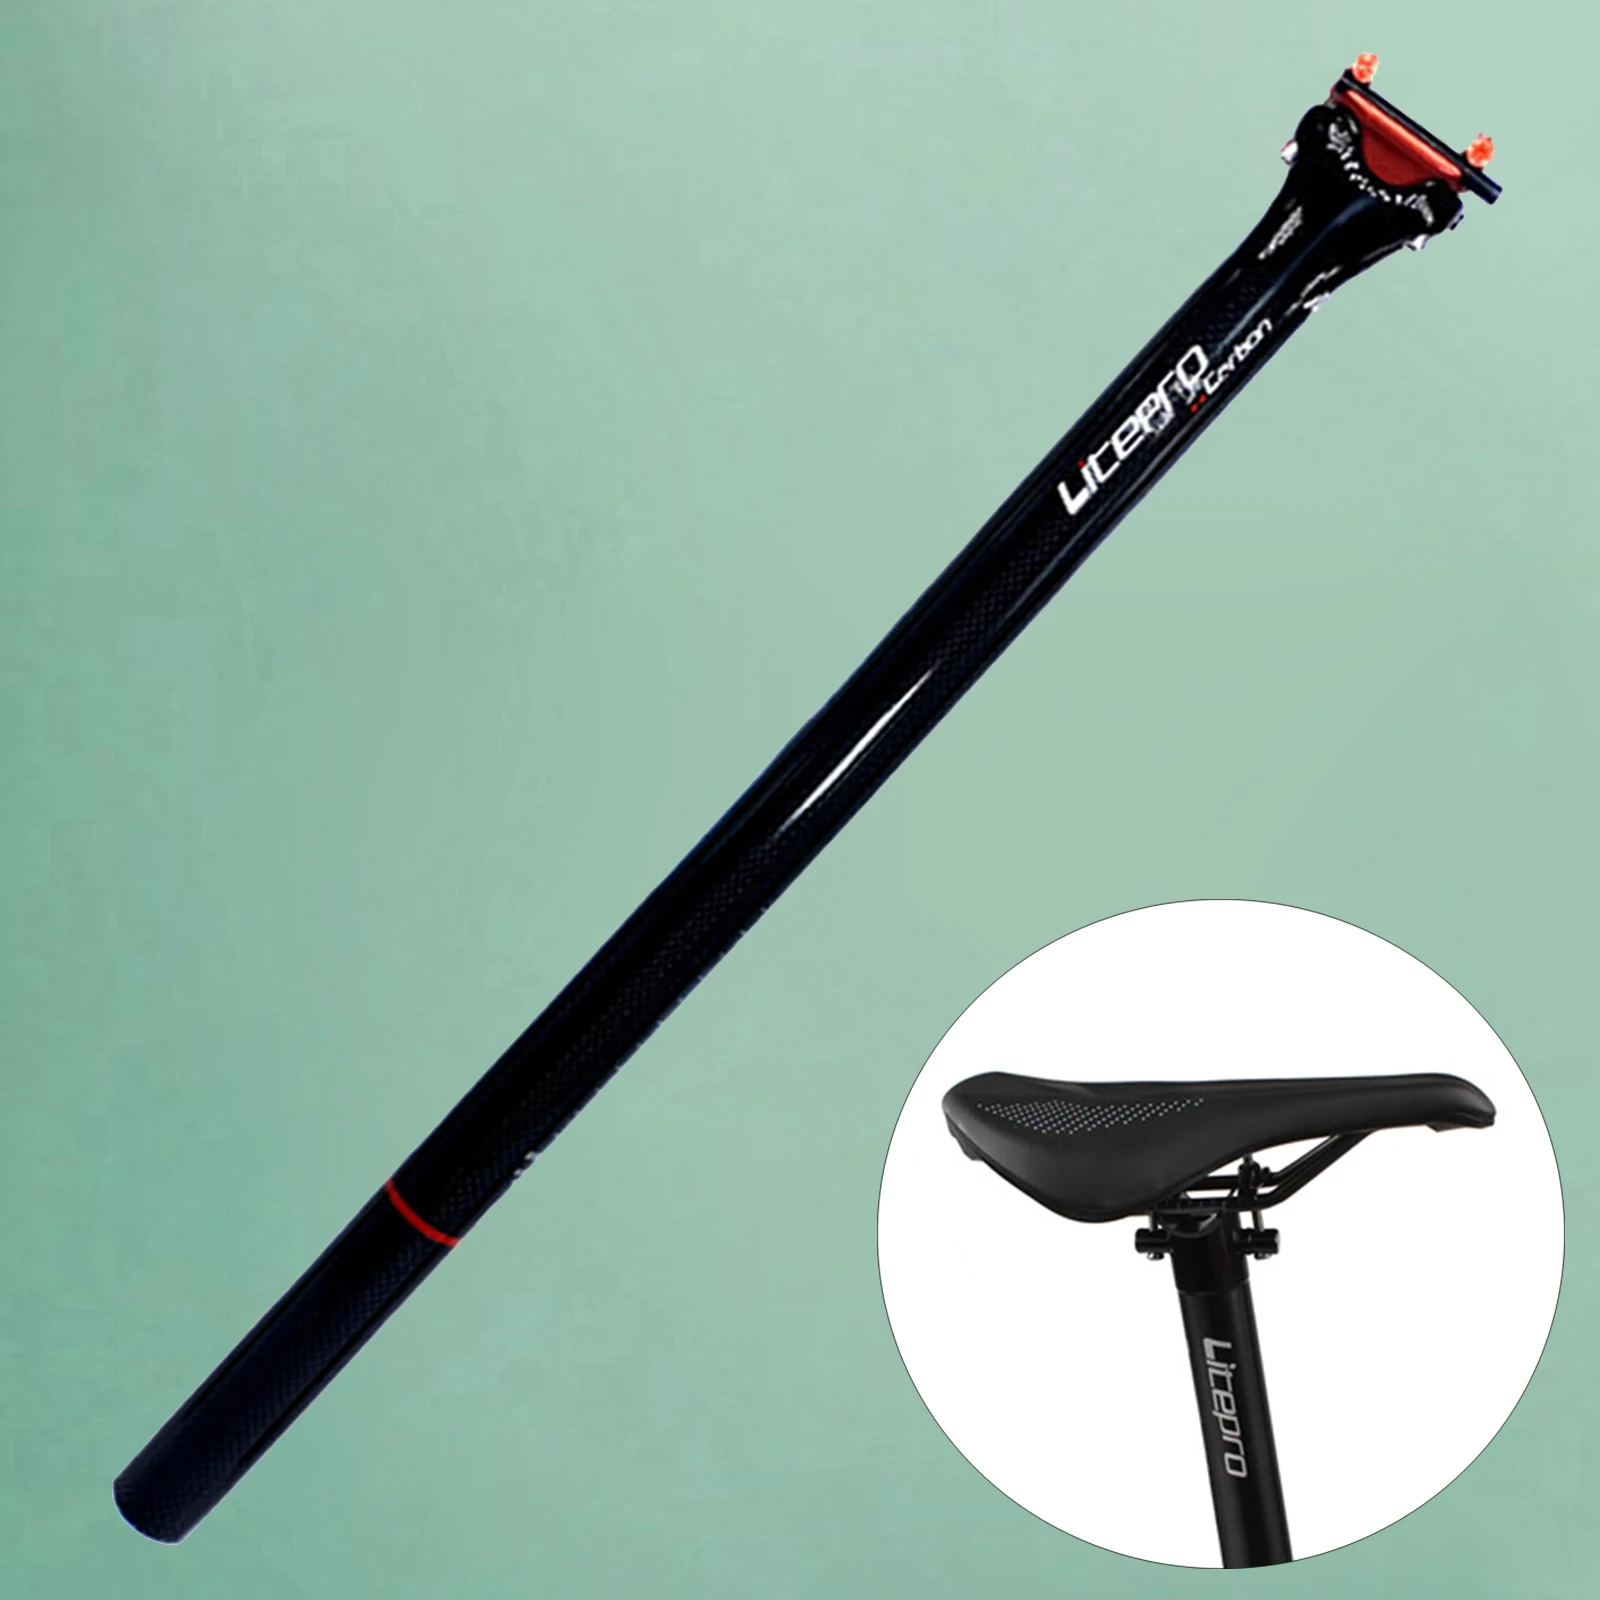 Carbon Seatpost 33.9 580mm Bike Seatpost Suitable for Most Bicycle Folding Bike